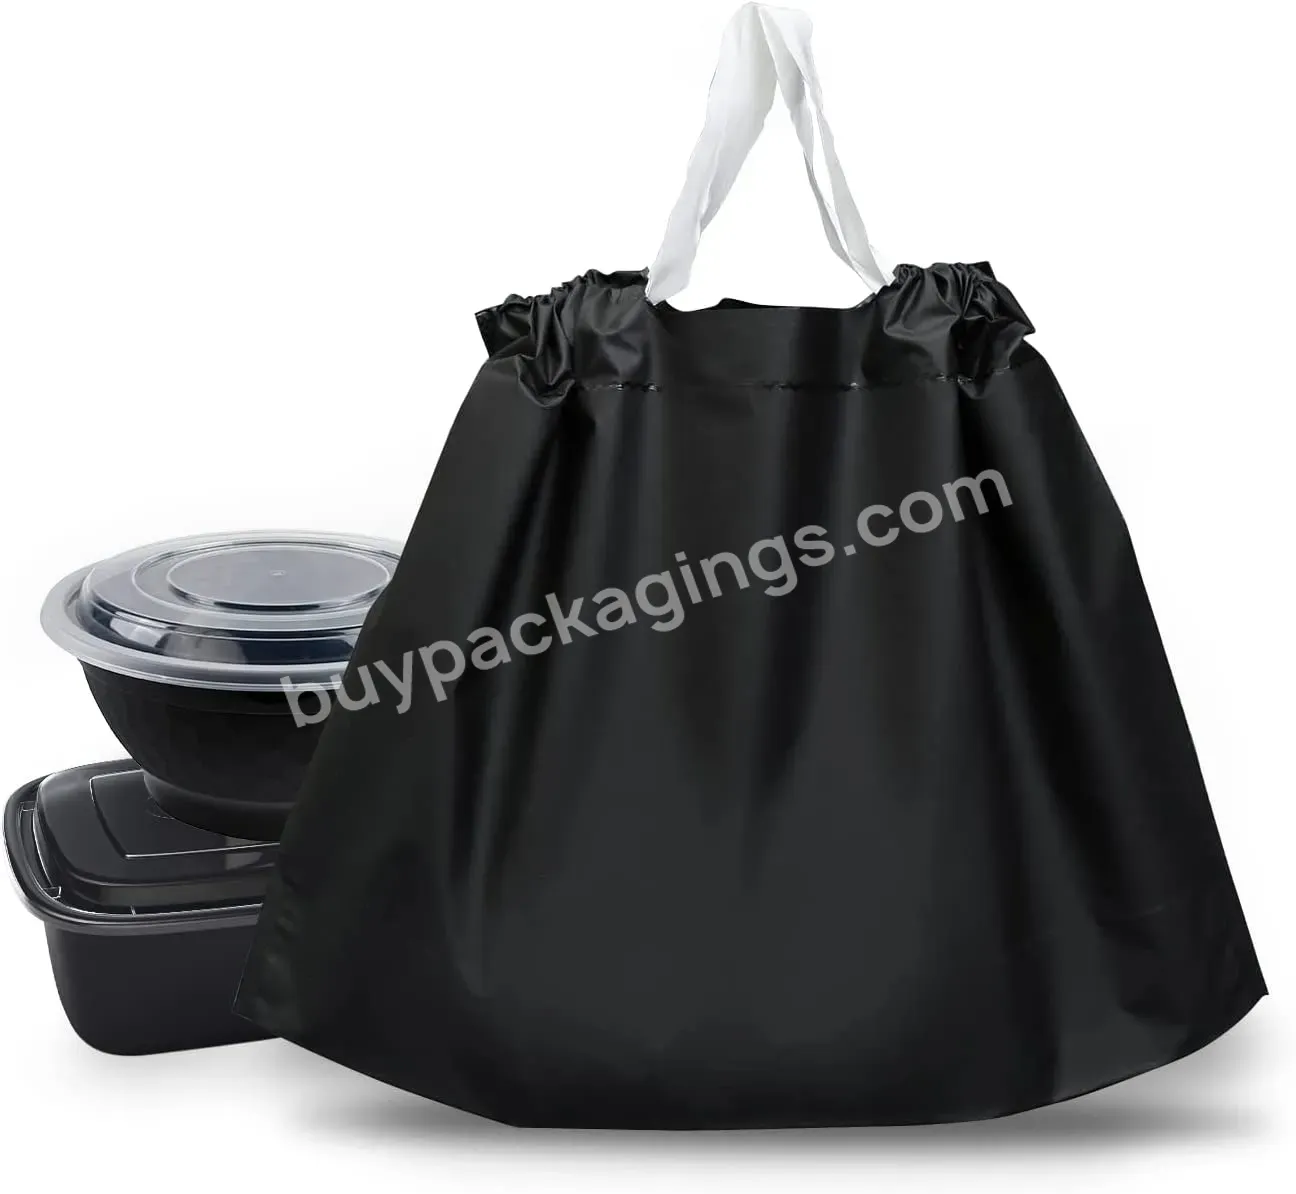 Eco Friendly Heavy Duty Customize Clear Plastic Bag Packaging Bag With Drawstring - Buy Packaging Bag With Drawstring,Plastic Bag With Drawstring,Heavy Duty Plastic Bag.